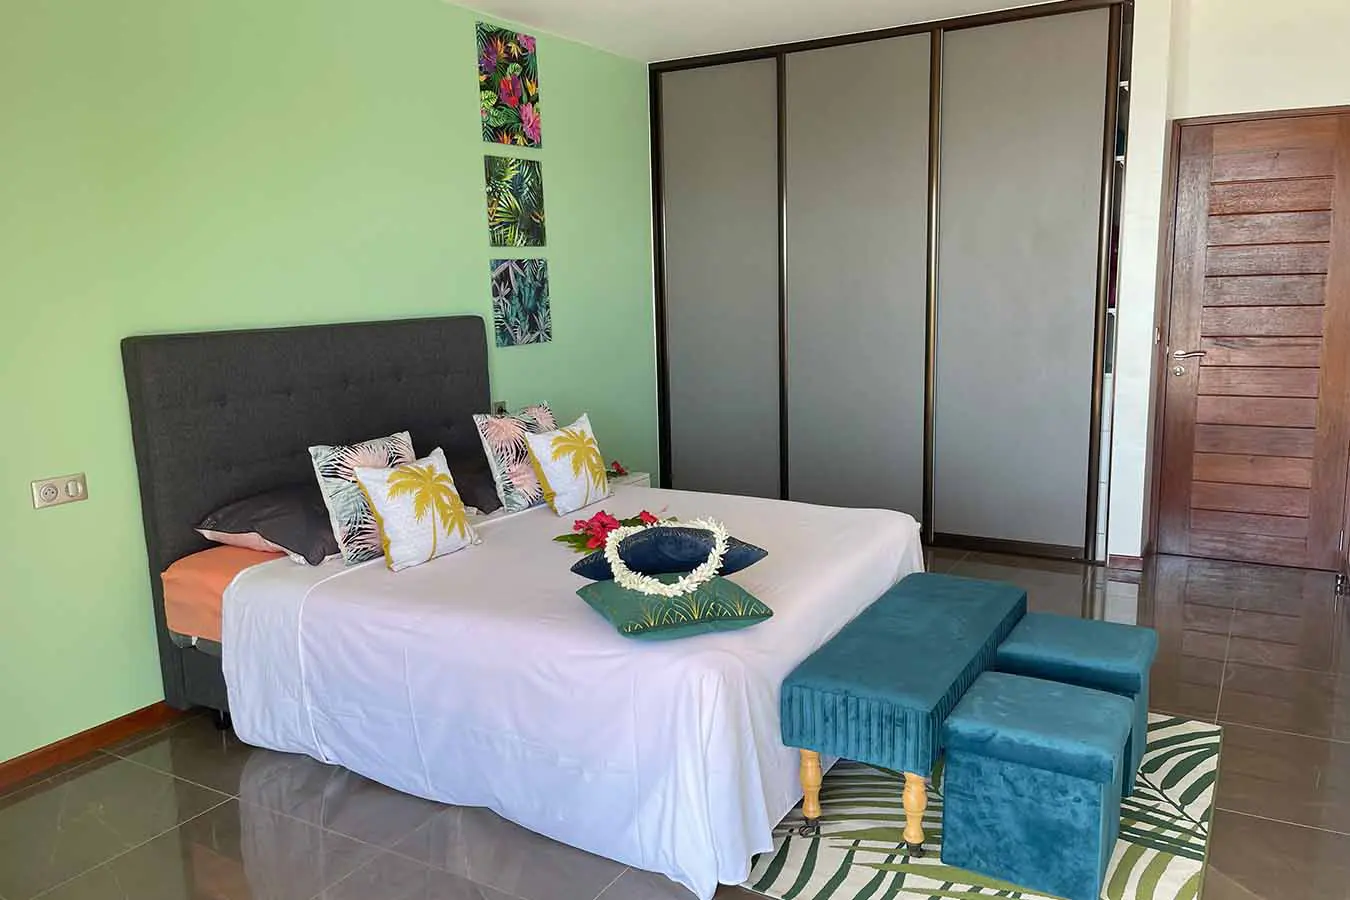 Comfortable double bed and wardrobe in our Bora Bora vacation home